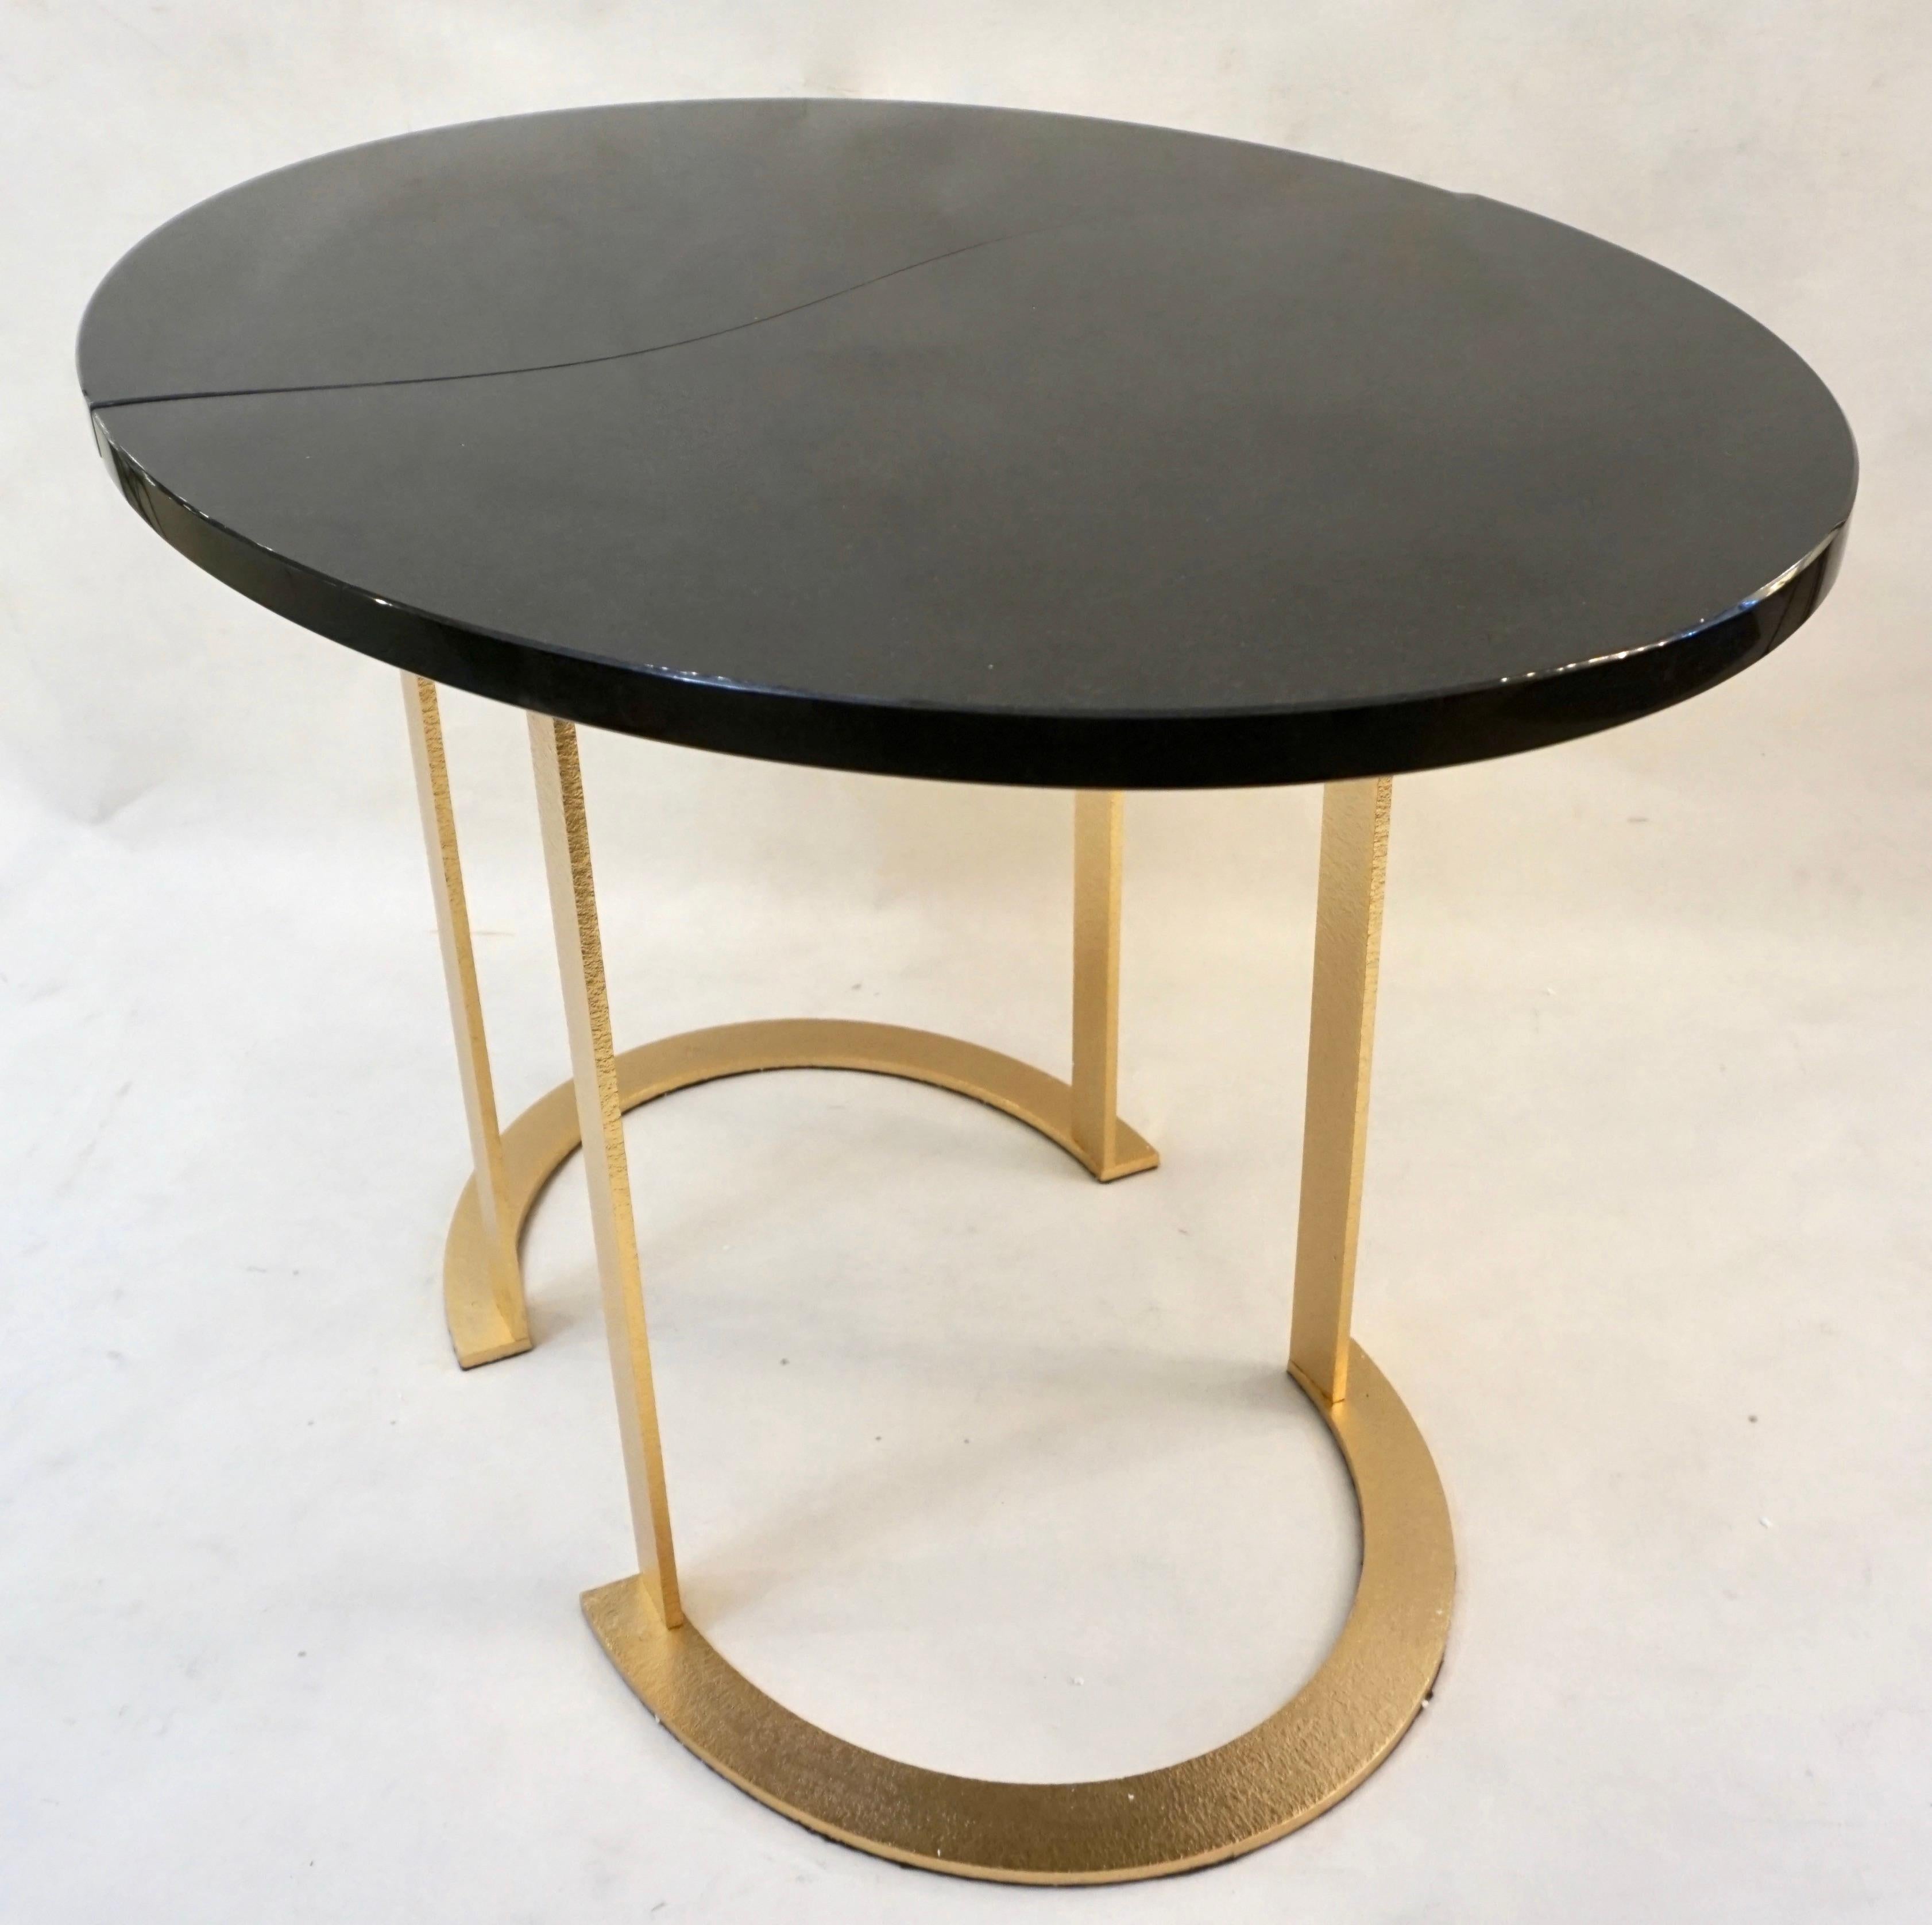 Bespoke Italian Textured Brass Black Granite Oval Side Table Doubles as a Pair 2